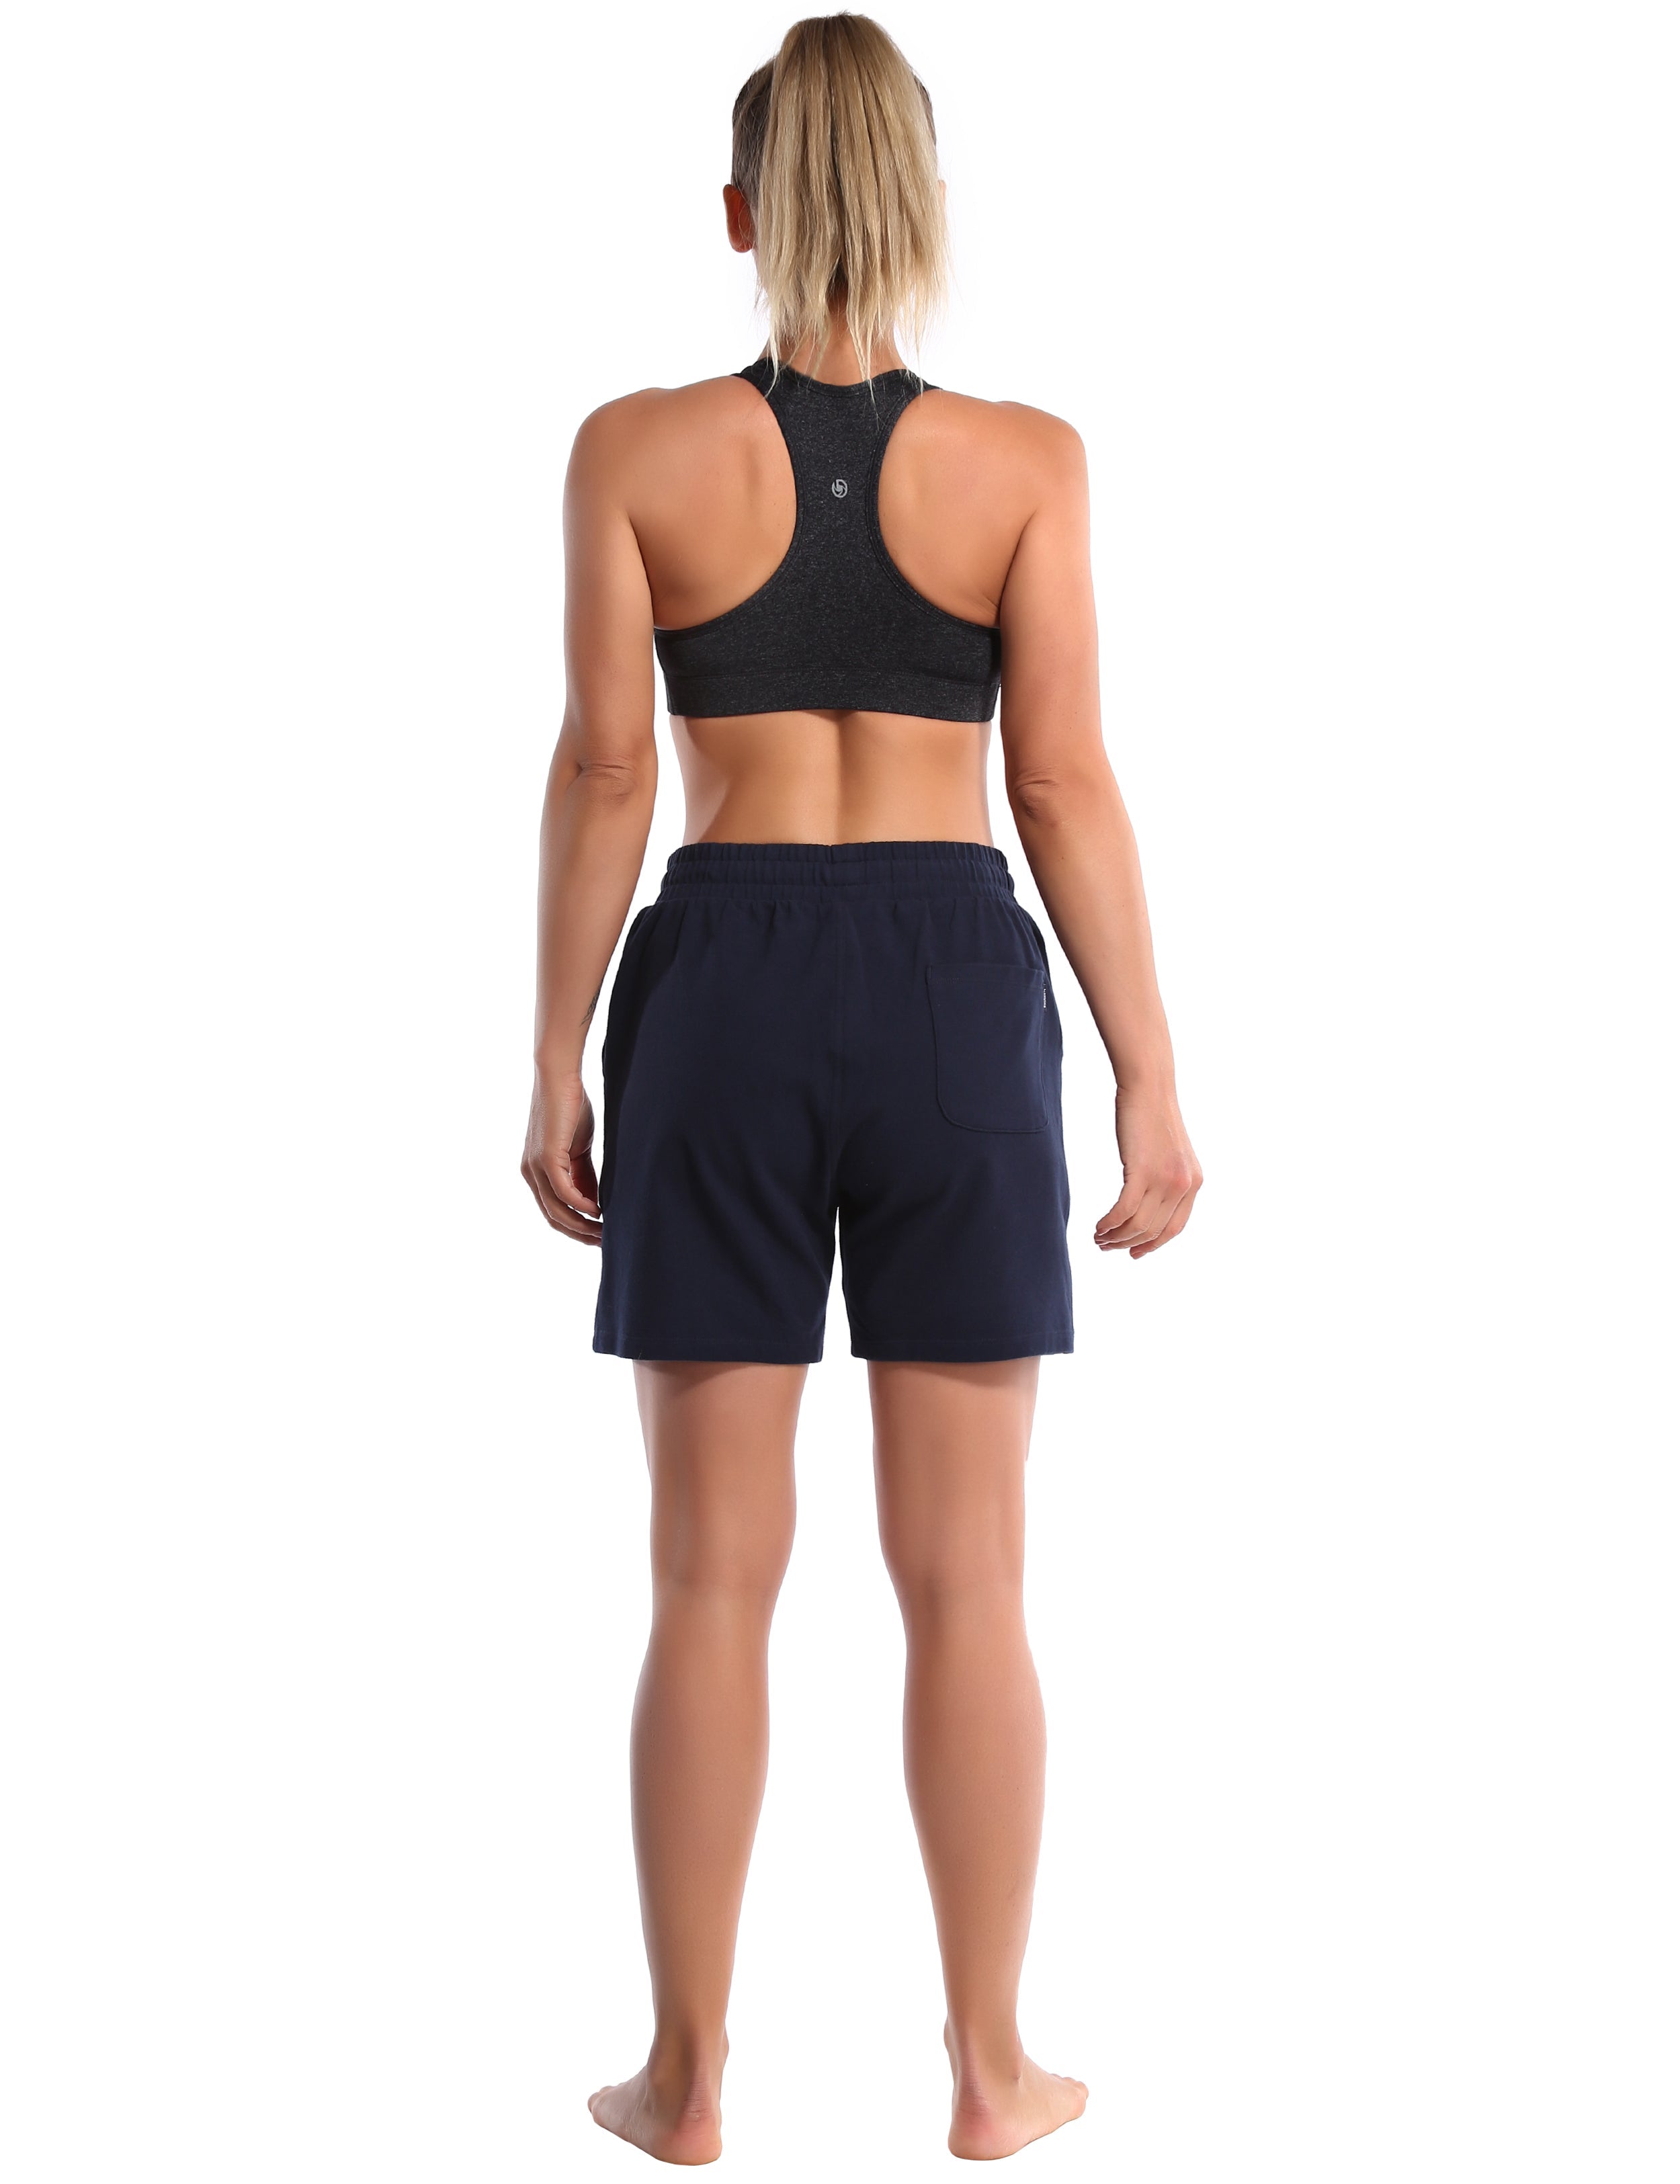 5" Joggers Shorts darknavy 90% Cotton, 10% Spandex Soft and Elastic Drawstring closure Lightweight & breathable fabric wicks away sweat to keep you comfortable Elastic waistband with internal drawcord for a snug, adjustable fit Big side pockets are available for 4.7", 5", 5.5" mobile phone Reflective logo helps you stand out in low light Perfect for any types of outdoor exercises and indoor fitness,like Biking,running,walking,jogging,lounging,workout,gym fitness,casual use,etc